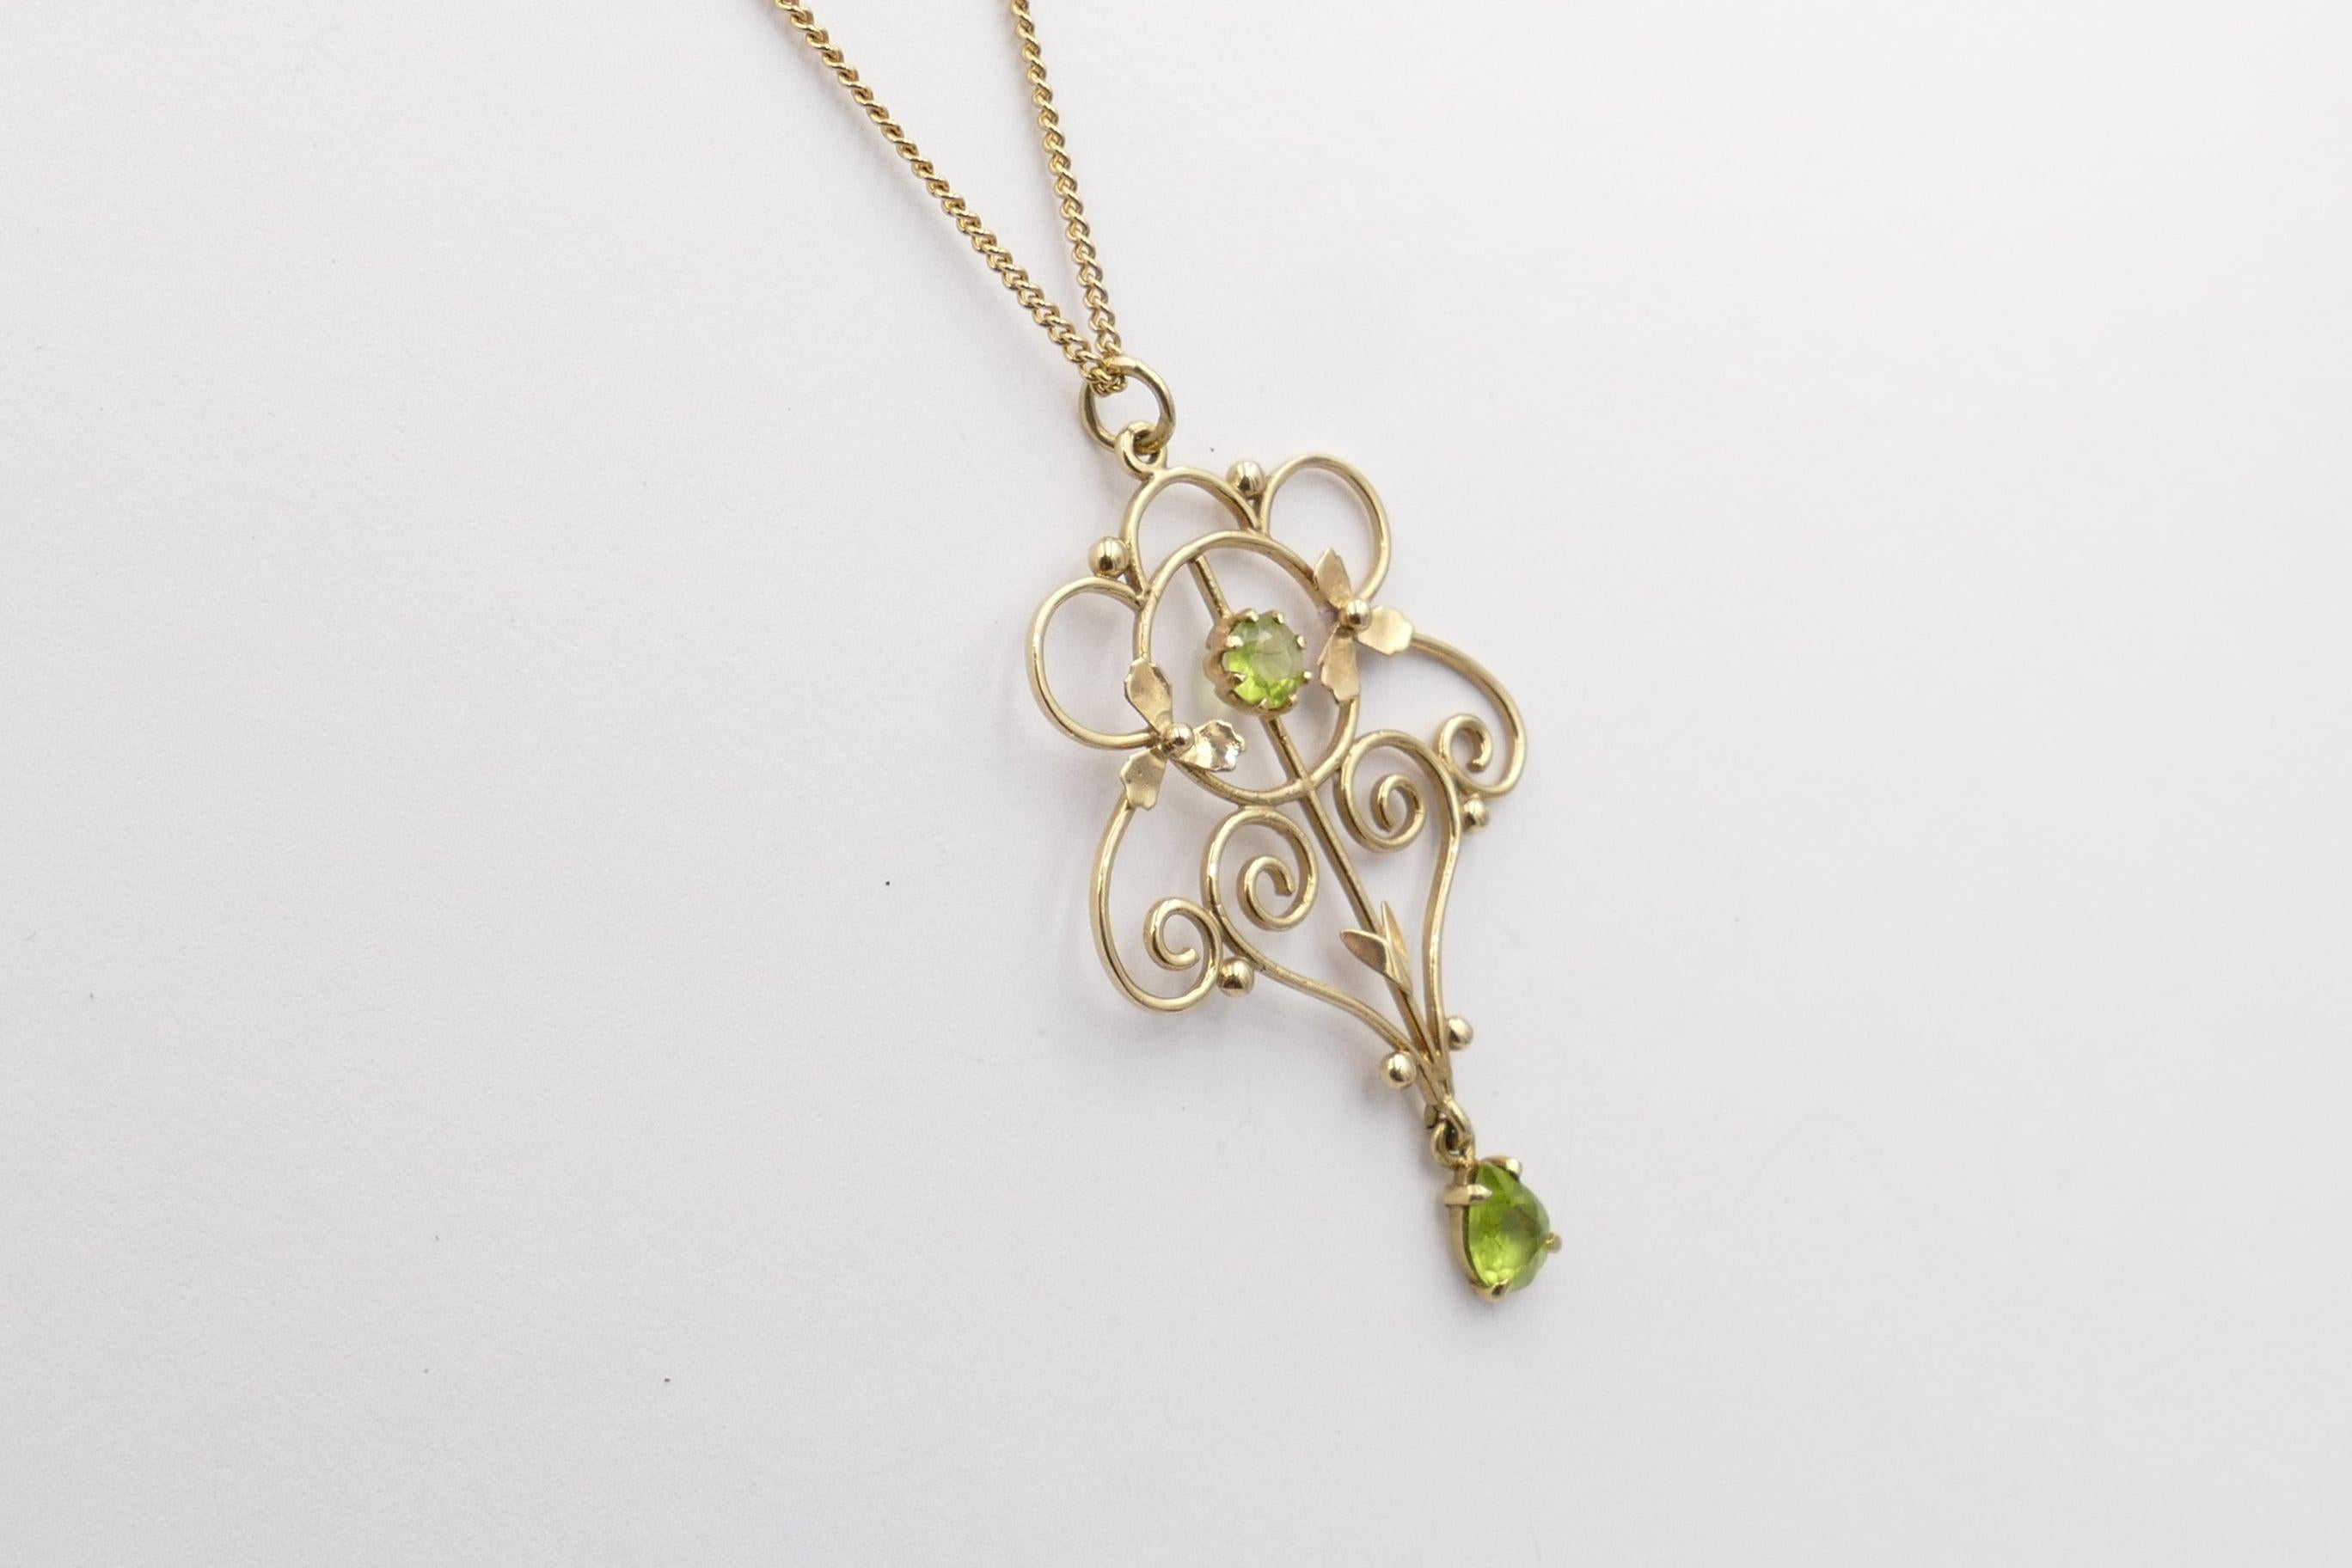 This lovely old - probably Edwardian- Pendant features 1 Round Cut Peridot, Green-yellow in Colour, Tone medium, eye-clean as well as a larger Pear Cut Peridot of similar colouring & 4 claw set.
The Pendant measures 50mm X 30mm, inclusive of the